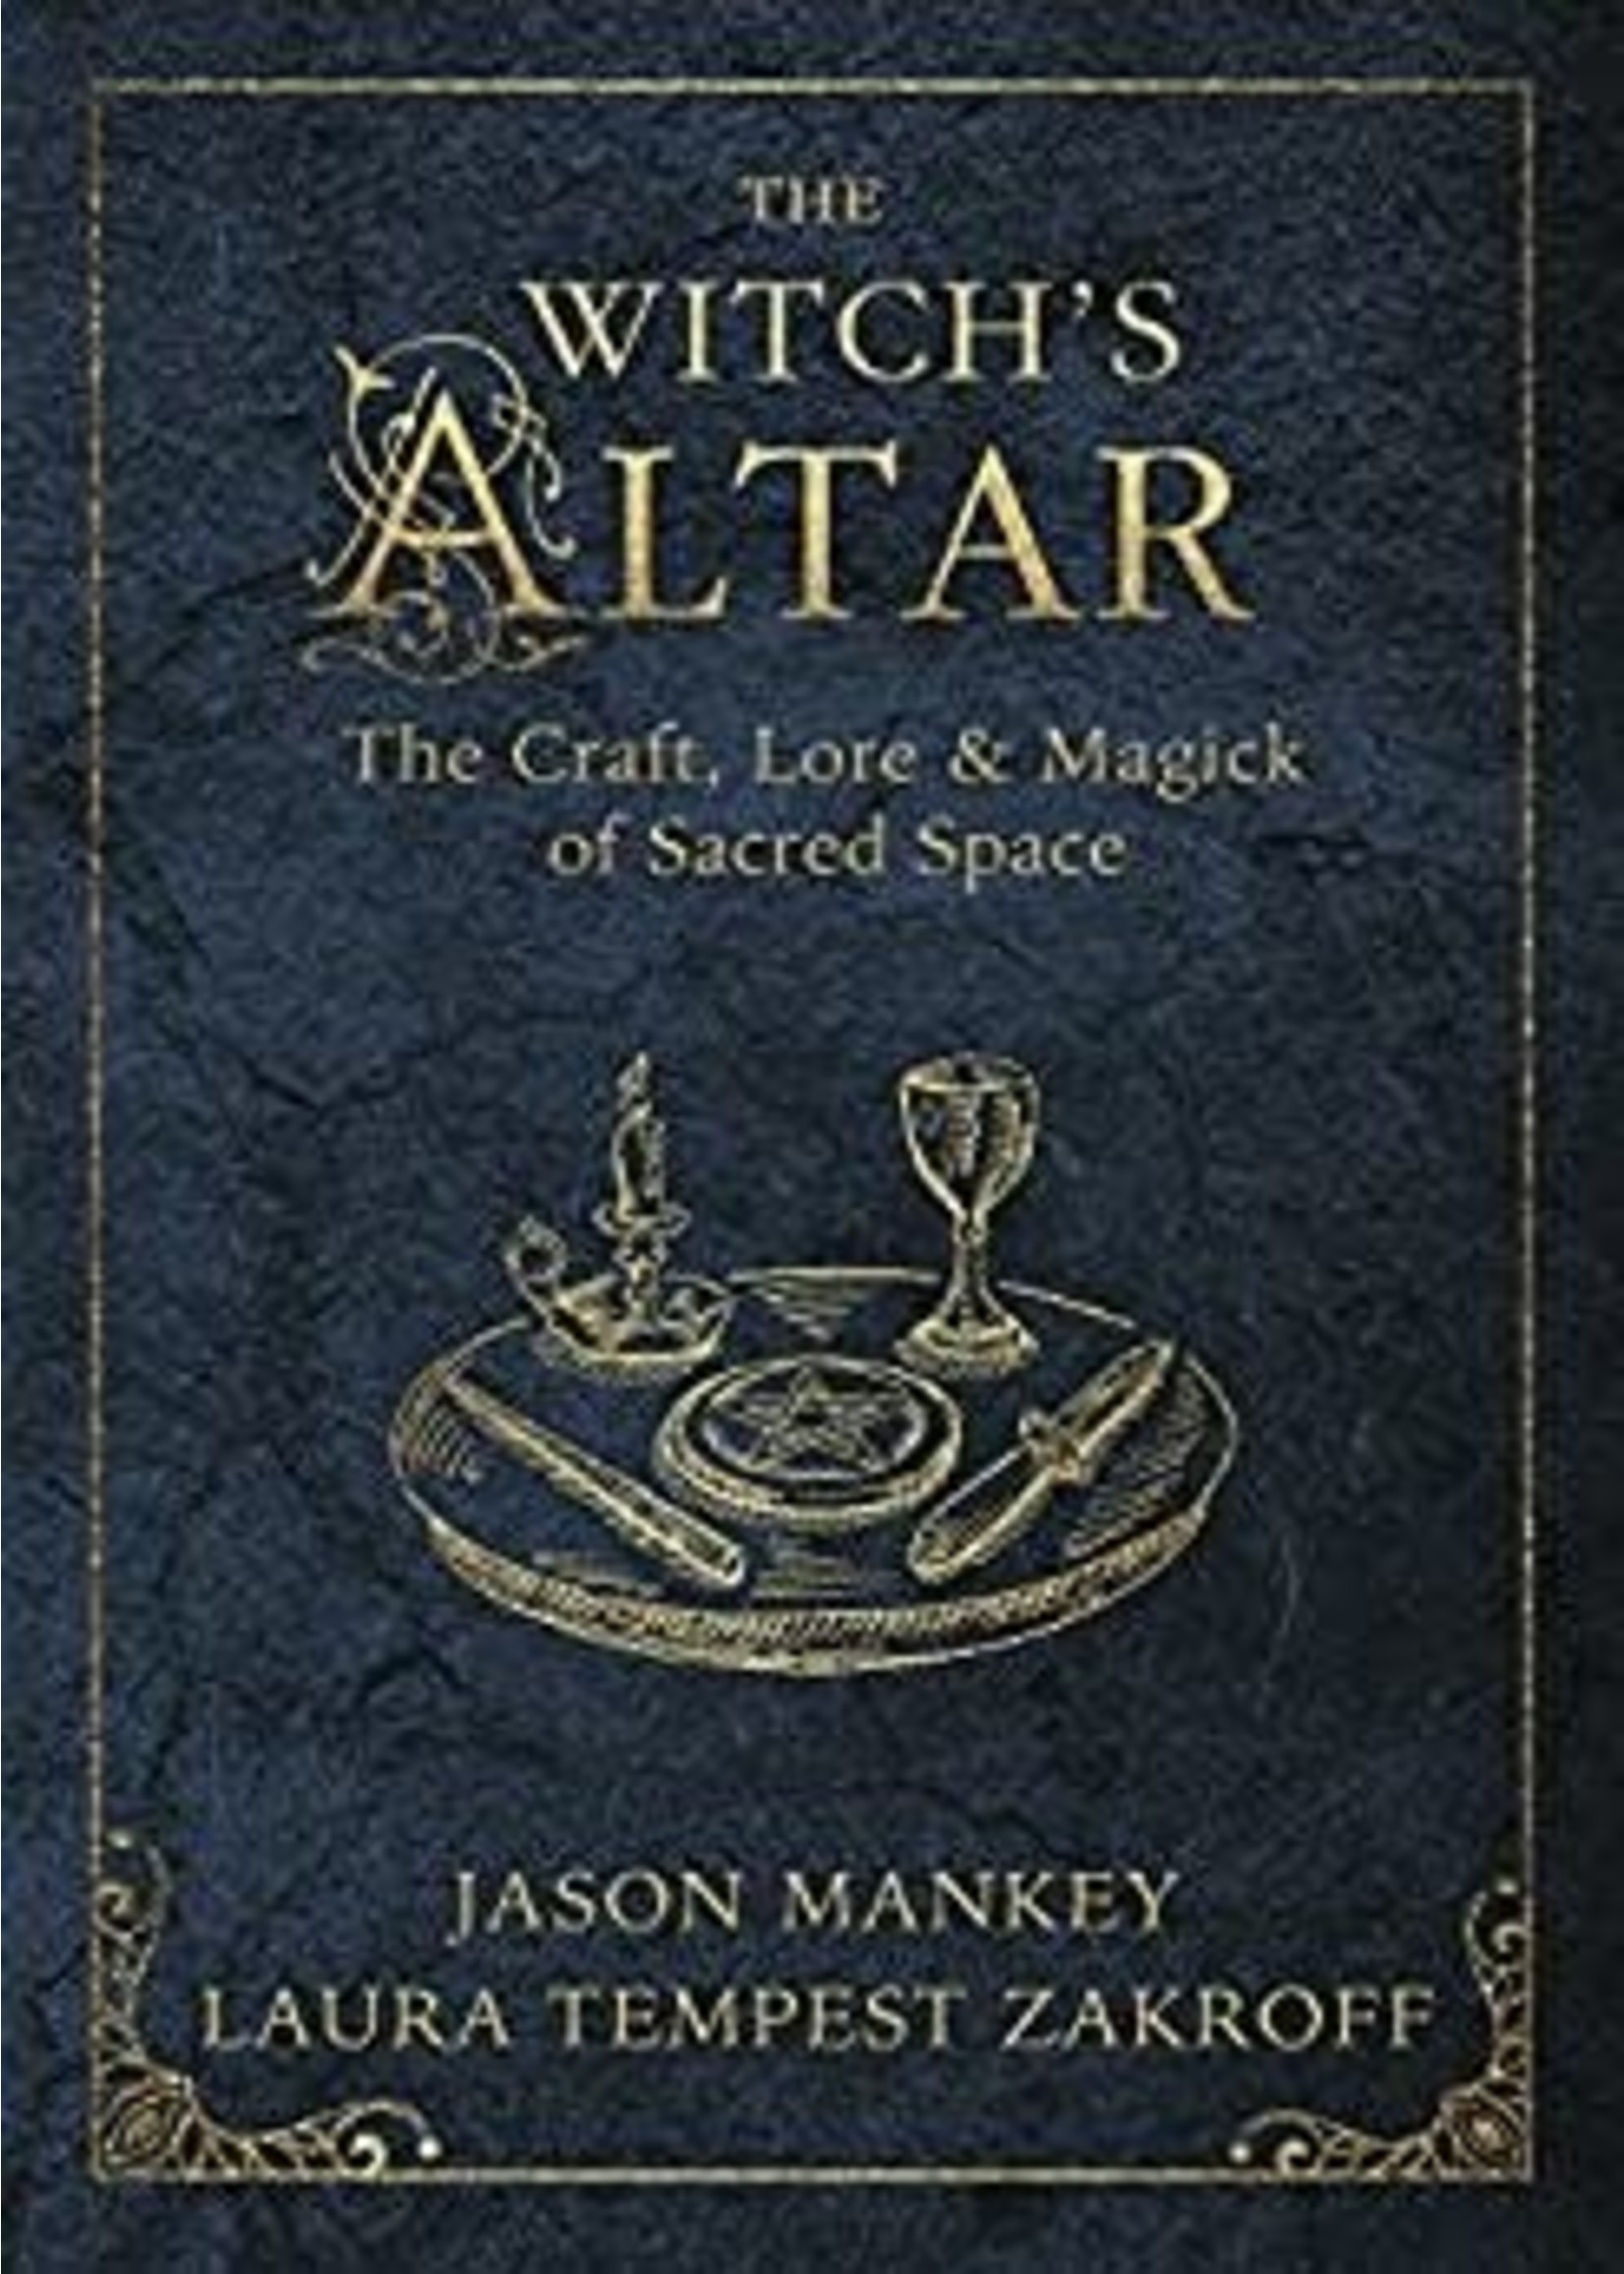 The Witch's Altar by Jason Mankey and Laura Tempest Zakroff